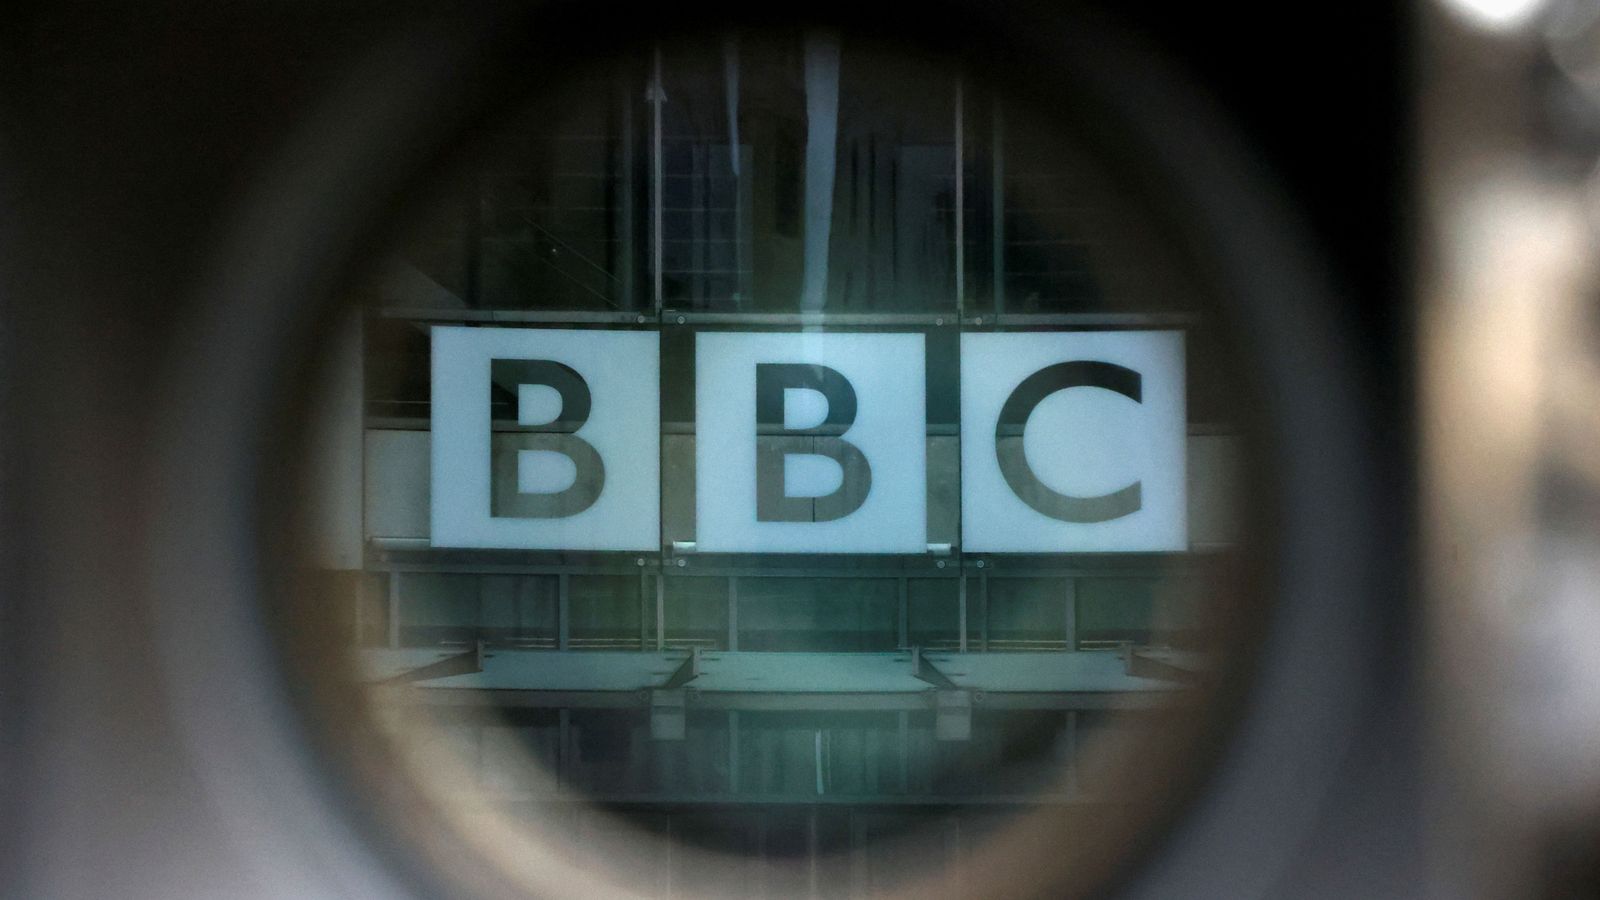 BBC presenter scandal is sleazy and depressing - but at the heart of this a family is suffering